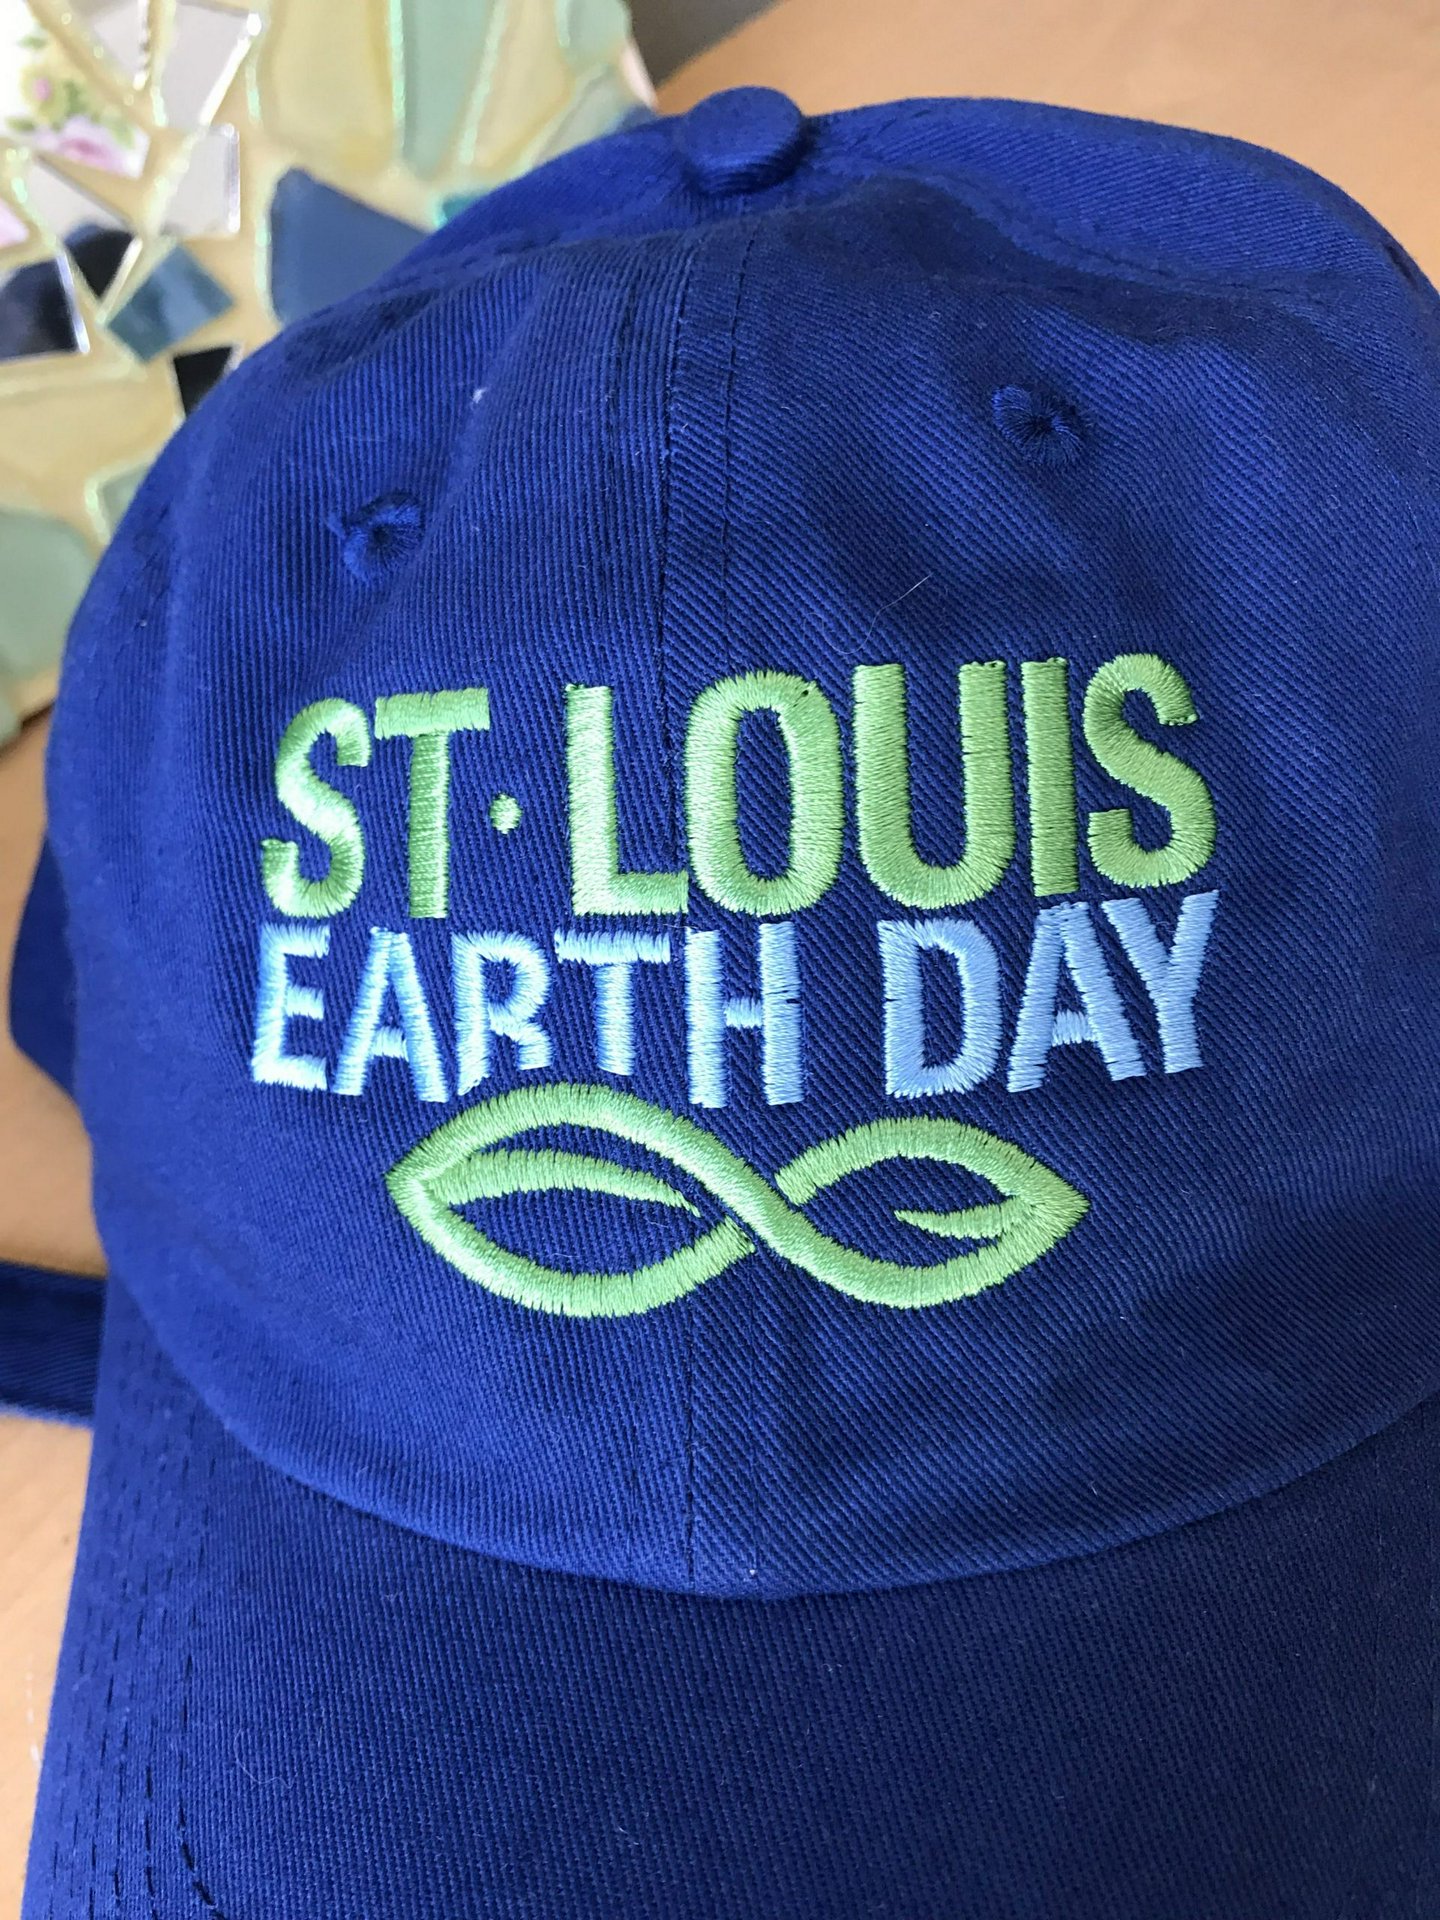 Limited Edition 30th Anniversary St. Louis Earth Day Hat | earthday365